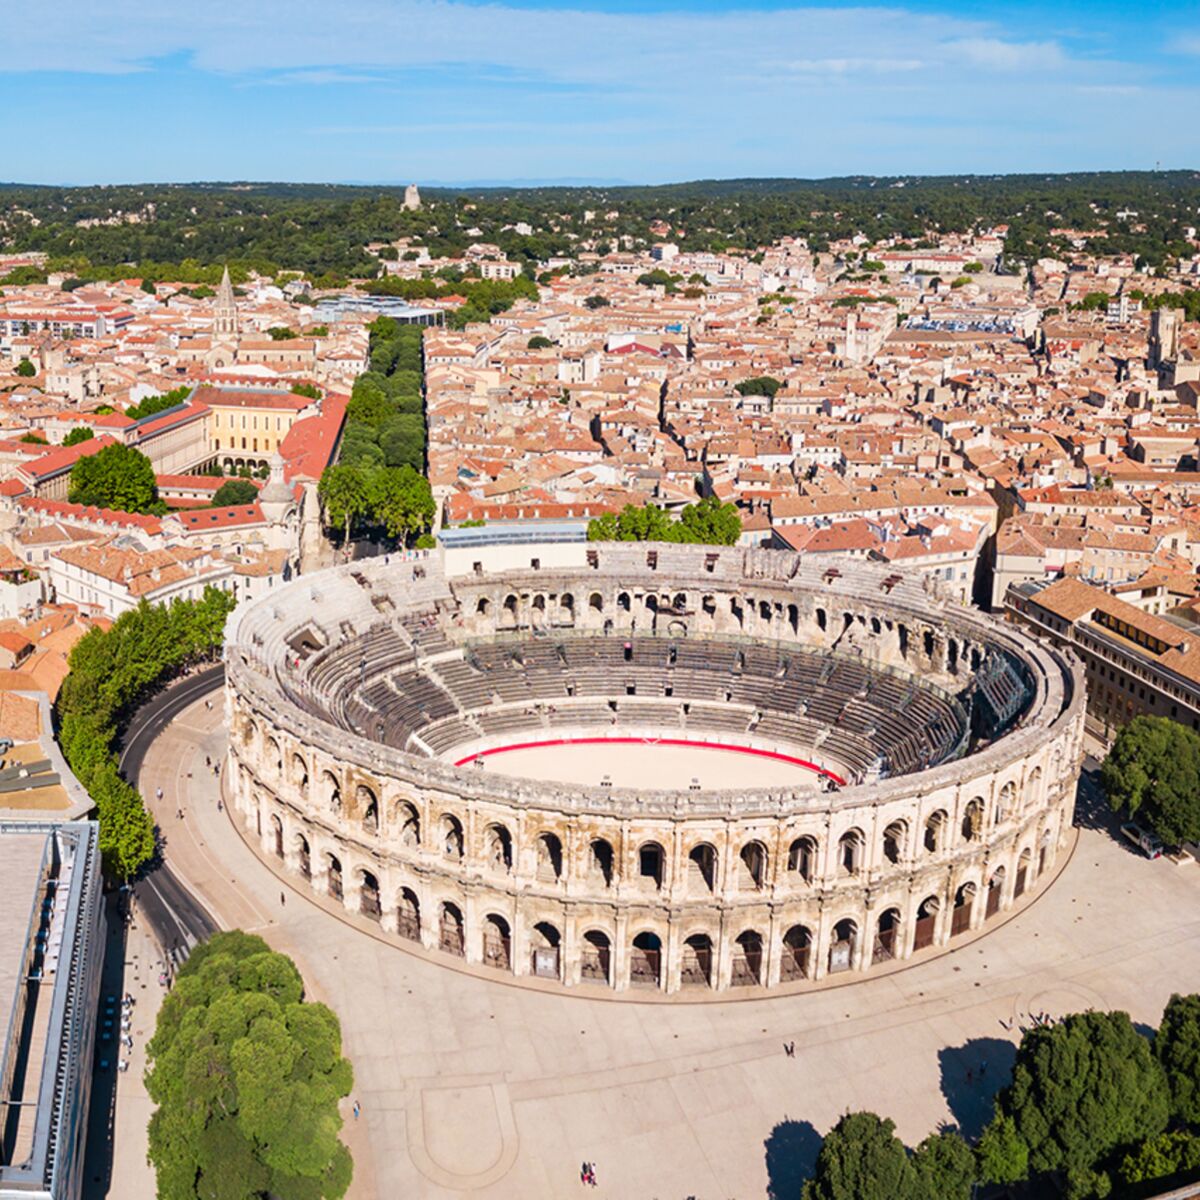 Looking forward to an excursion to Nîmes later today